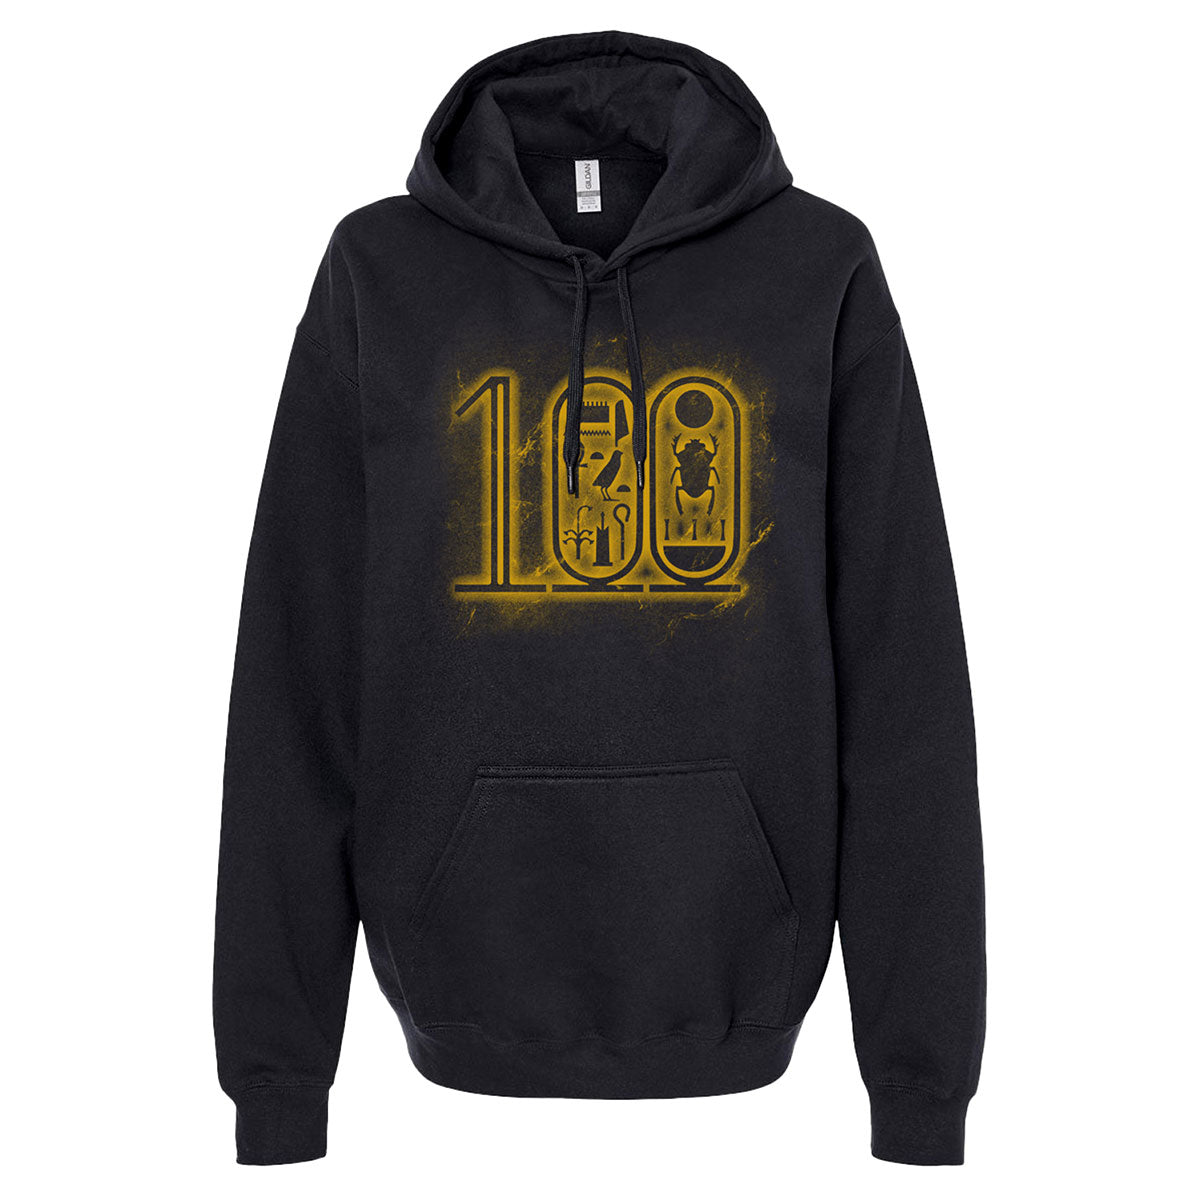 100th Anniversary Death Mask Pullover Hoodie